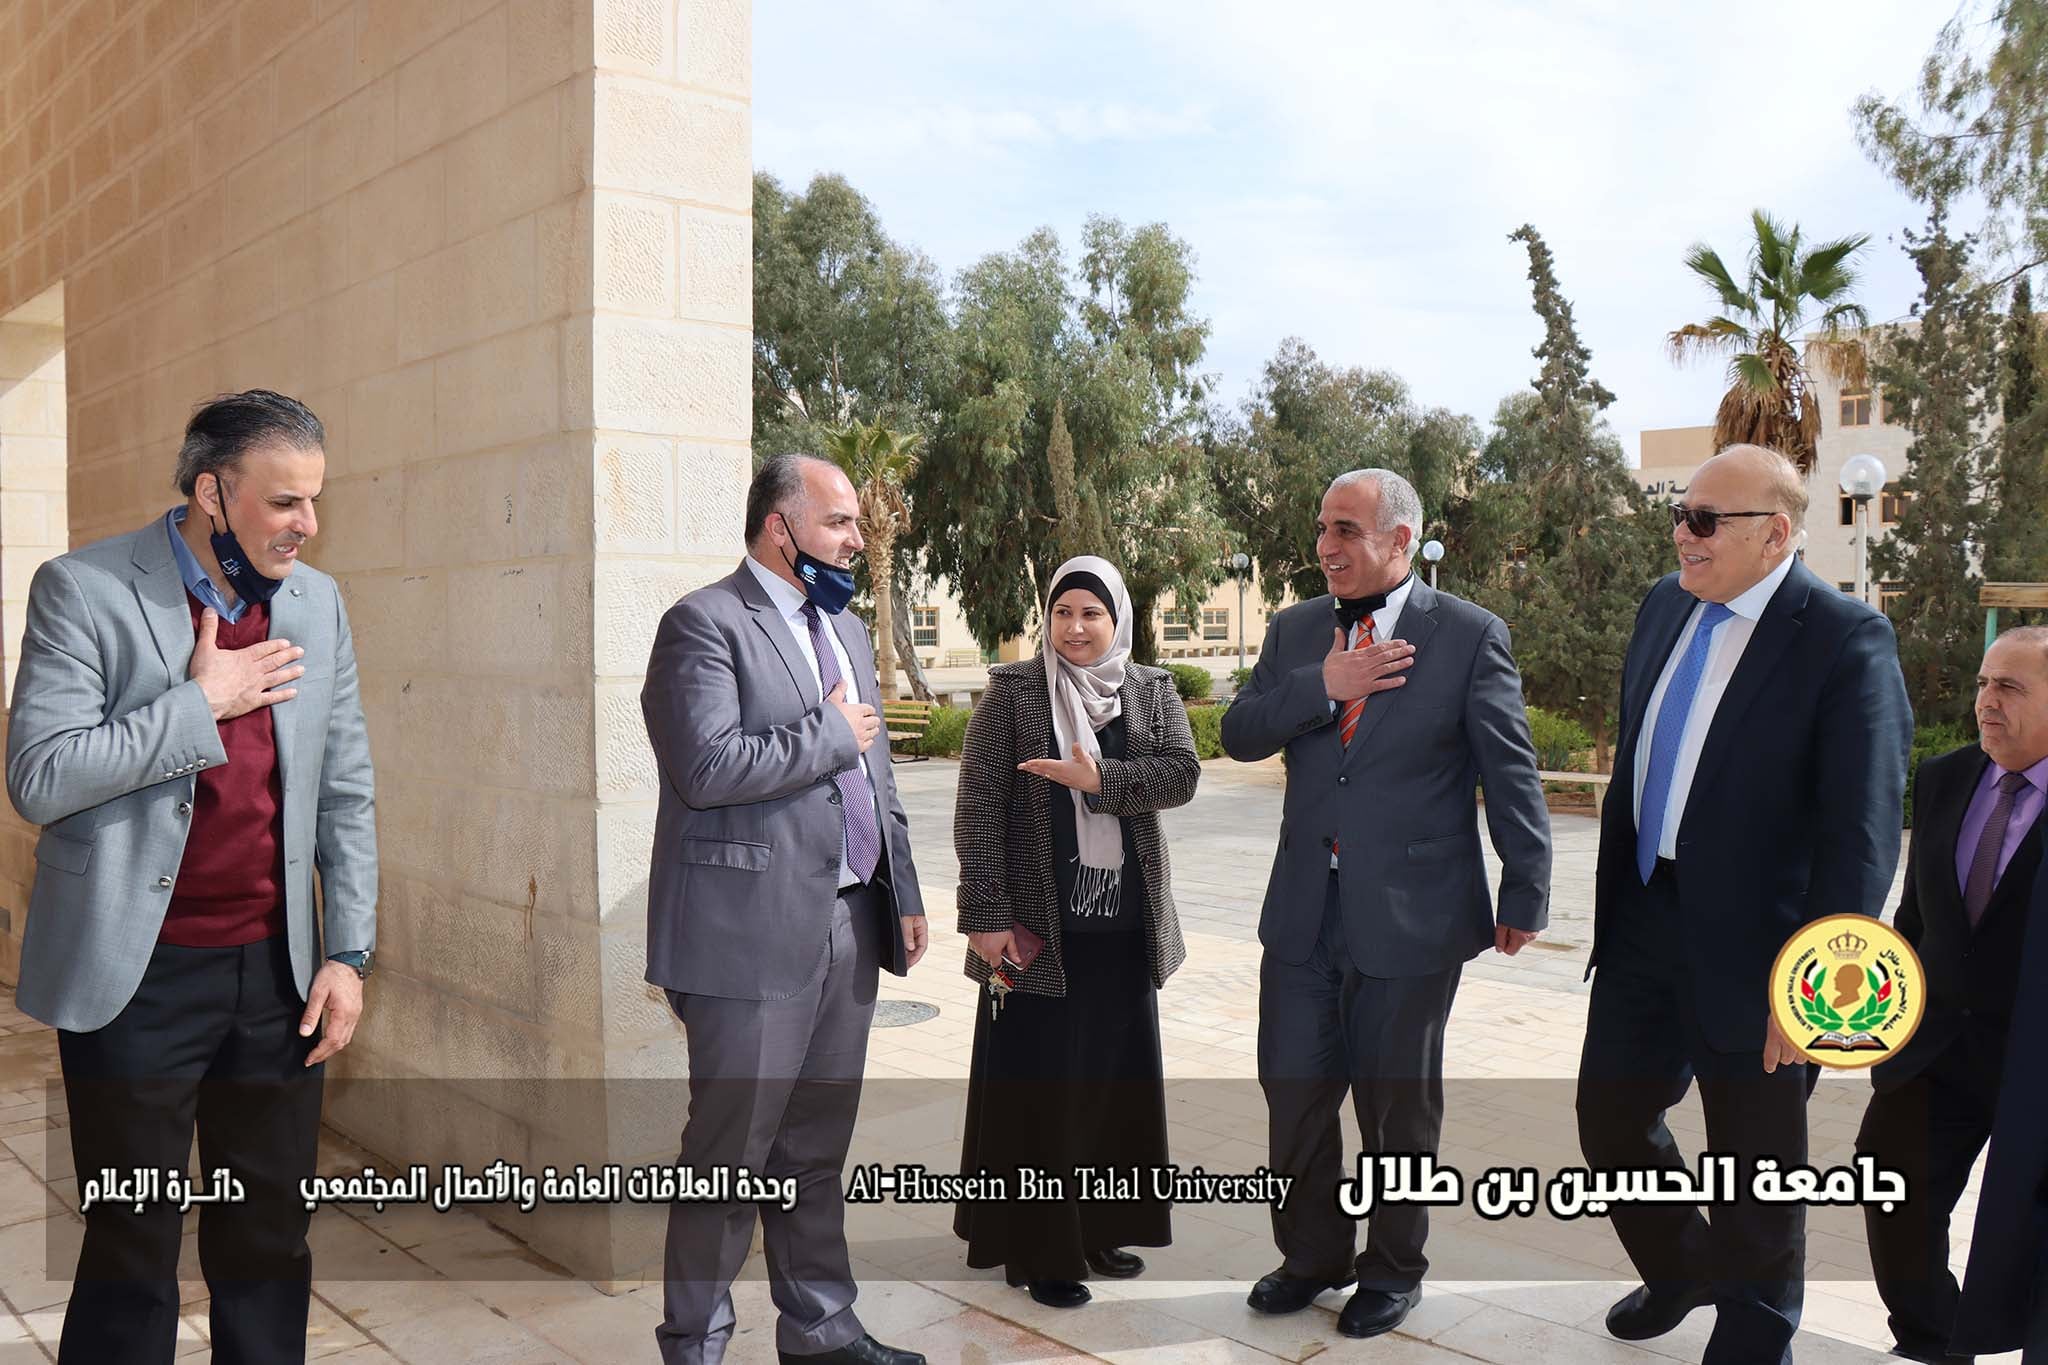 His Excellency the Secretary General of the Association of Arab Universities visits the College of Information Technology